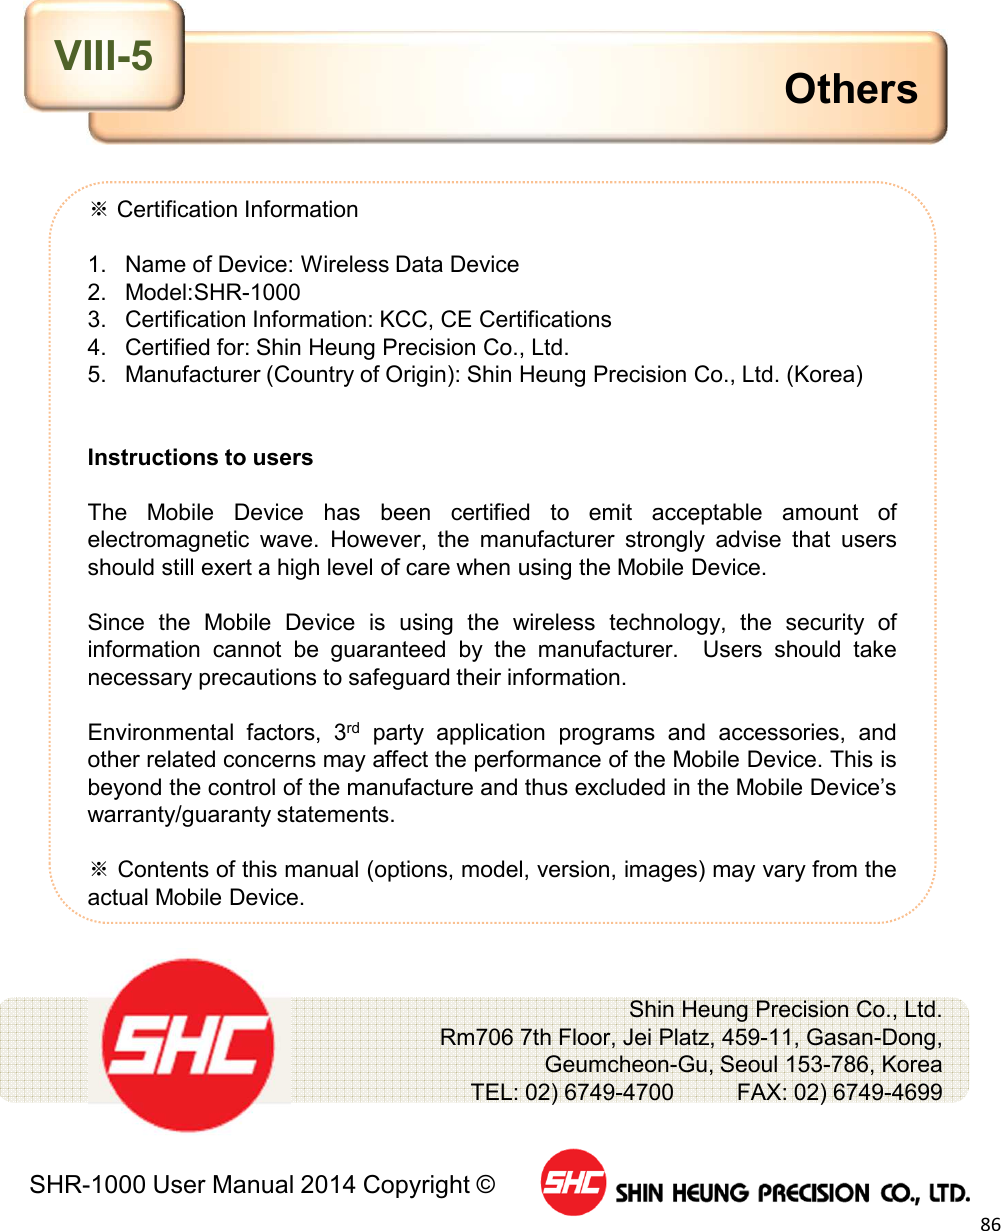 SHR-1000 User Manual 2014 Copyright ©86※Certification Information1. Name of Device: Wireless Data Device2. Model:SHR-10003. Certification Information: KCC, CE Certifications4. Certified for: Shin Heung Precision Co., Ltd.5. Manufacturer (Country of Origin): Shin Heung Precision Co., Ltd. (Korea)Instructions to usersThe Mobile Device has been certified to emit acceptable amount ofelectromagnetic wave. However, the manufacturer strongly advise that usersshould still exert a high level of care when using the Mobile Device.Since the Mobile Device is using the wireless technology, the security ofinformation cannot be guaranteed by the manufacturer. Users should takenecessary precautions to safeguard their information.Environmental factors, 3rd party application programs and accessories, andother related concerns may affect the performance of the Mobile Device. This isbeyond the control of the manufacture and thus excluded in the Mobile Device’swarranty/guaranty statements.※Contents of this manual (options, model, version, images) may vary from theactual Mobile Device.OthersShin Heung Precision Co., Ltd.     Rm706 7th Floor, Jei Platz, 459-11, Gasan-Dong,Geumcheon-Gu, Seoul 153-786, KoreaTEL: 02) 6749-4700          FAX: 02) 6749-4699    VIII-5